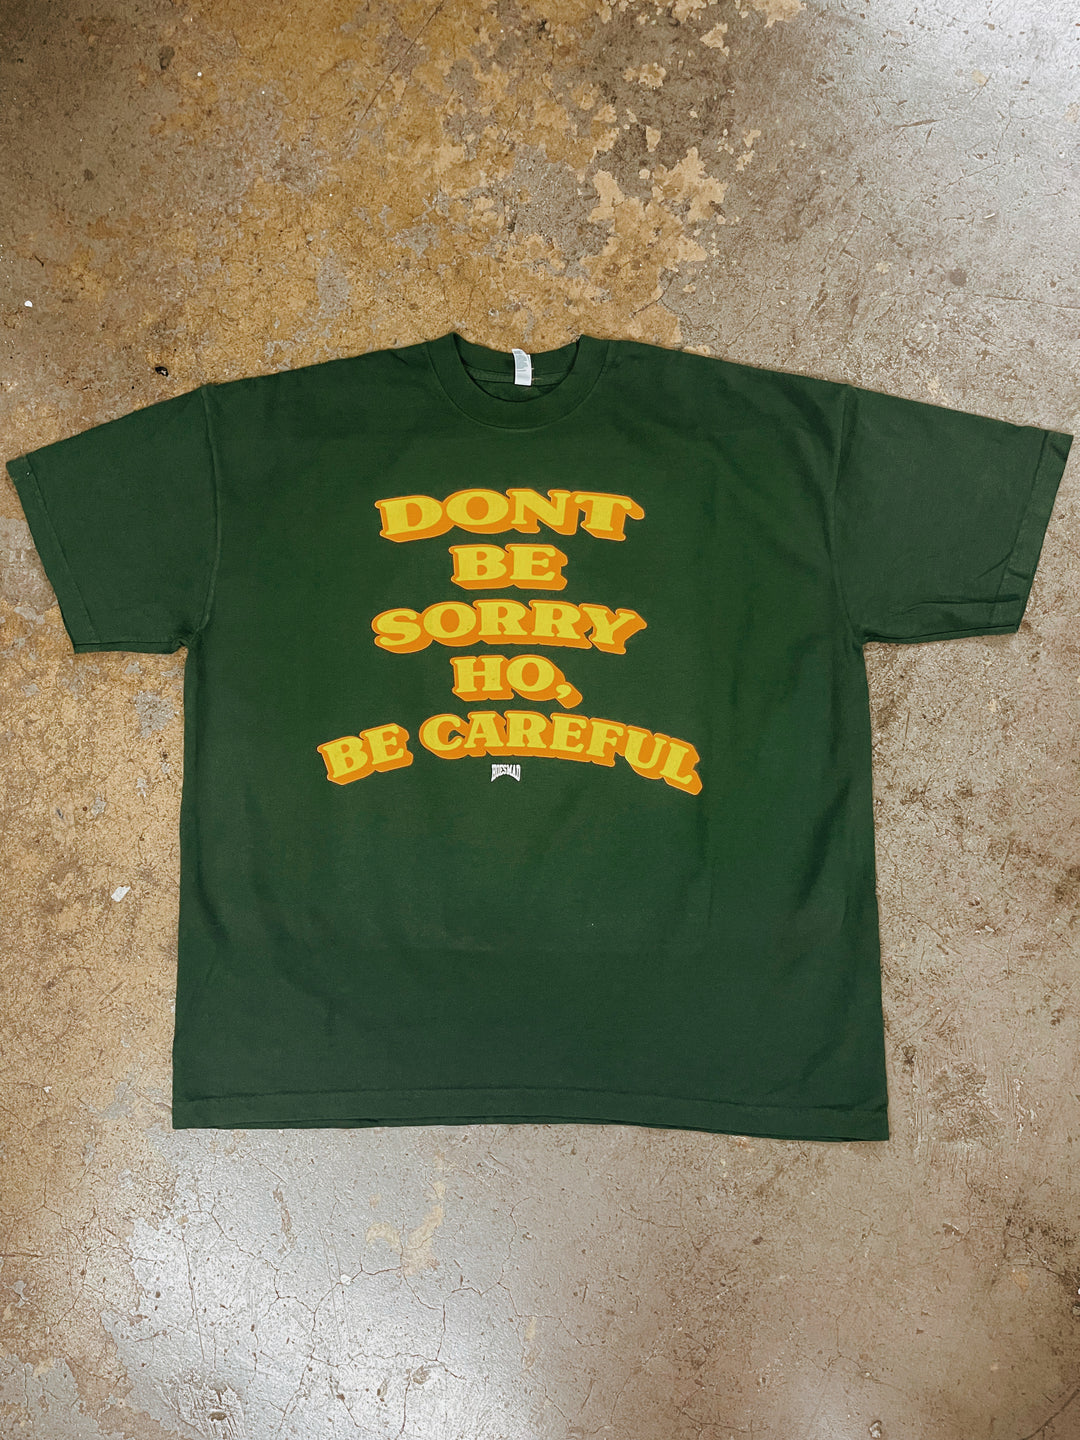 Dont Be Sorry Ho, Be Careful Green Tee